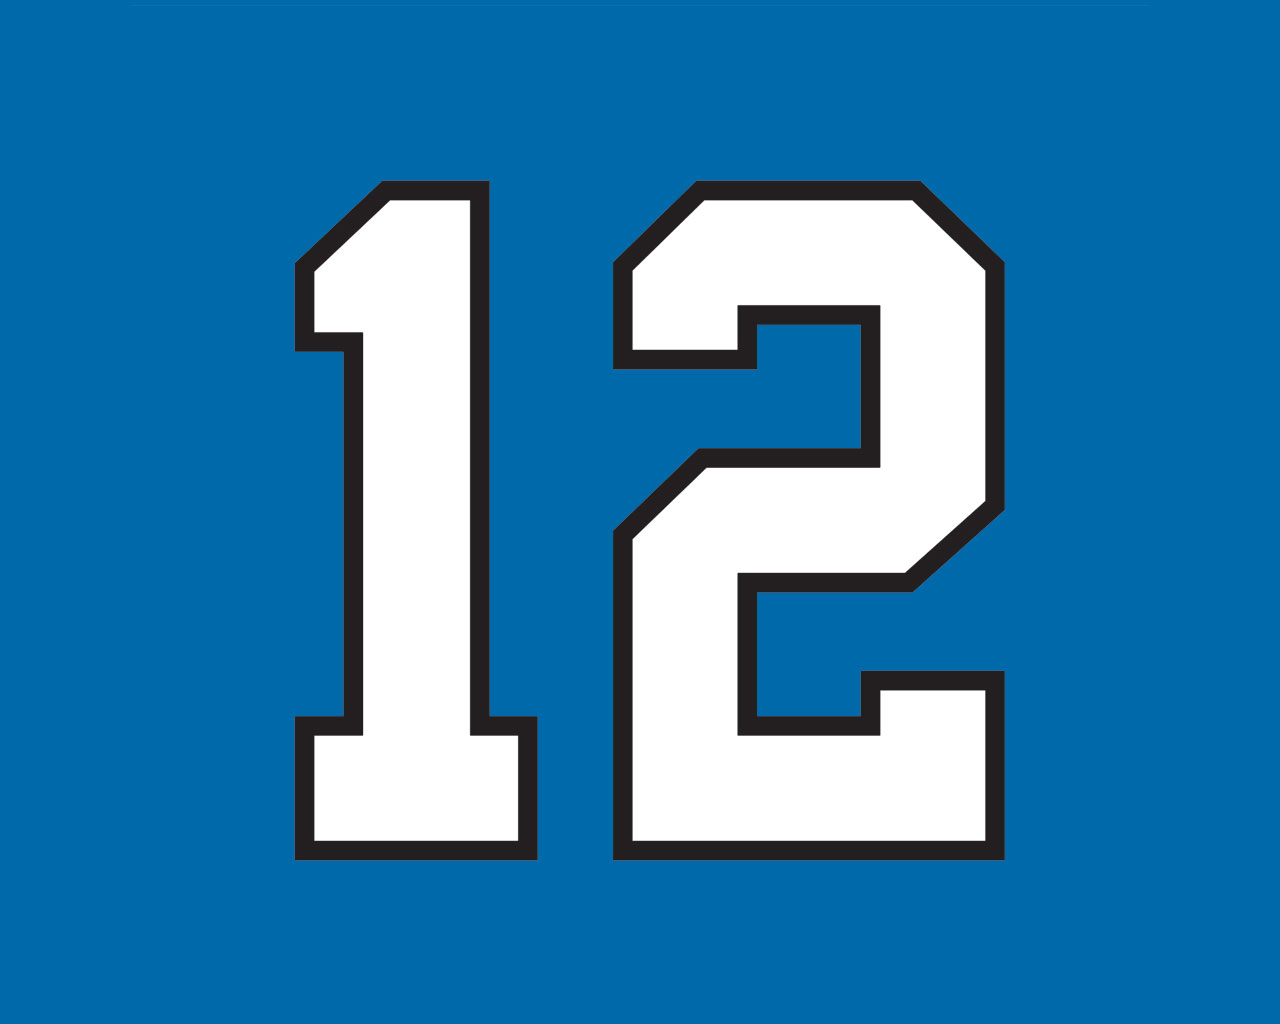 Seattle Seahawks 12th Man Wallpaper For Phones